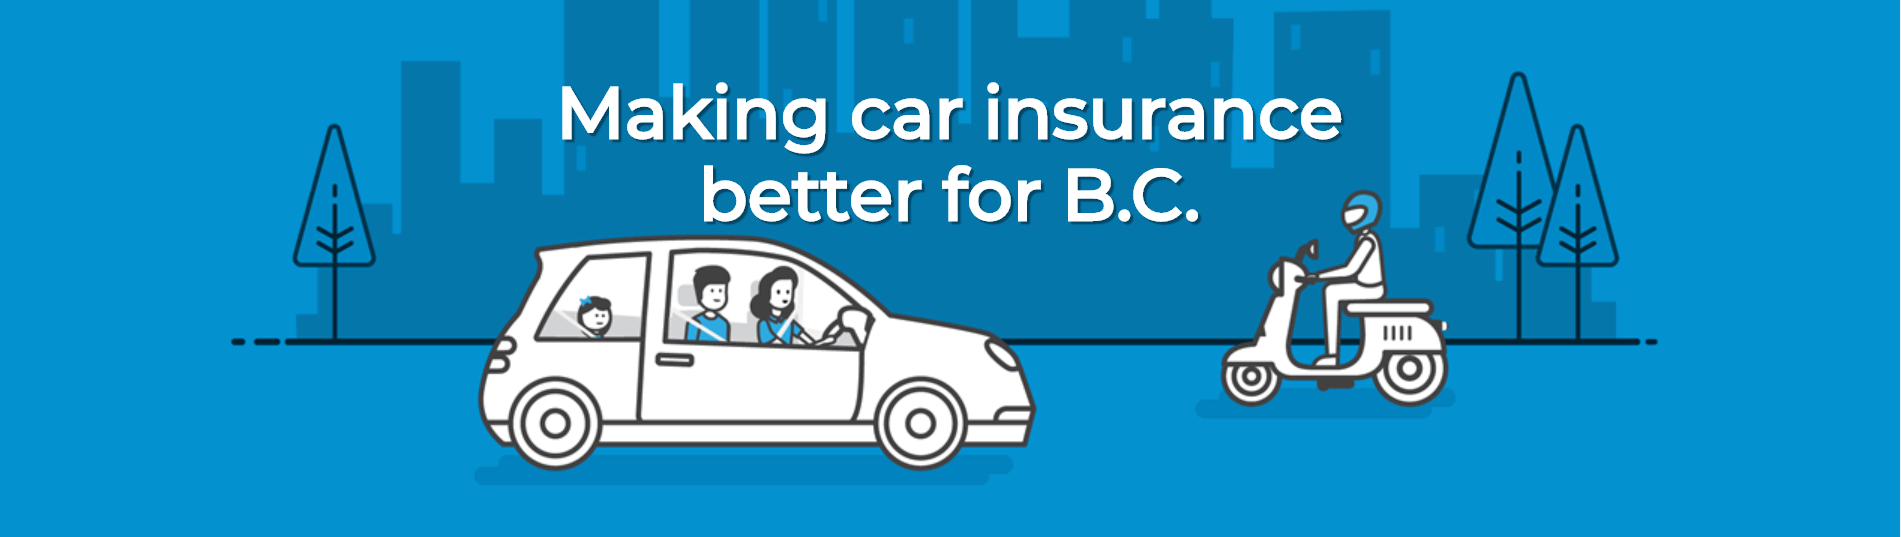 ICBC Save Up To 50 Insurance Made Easy